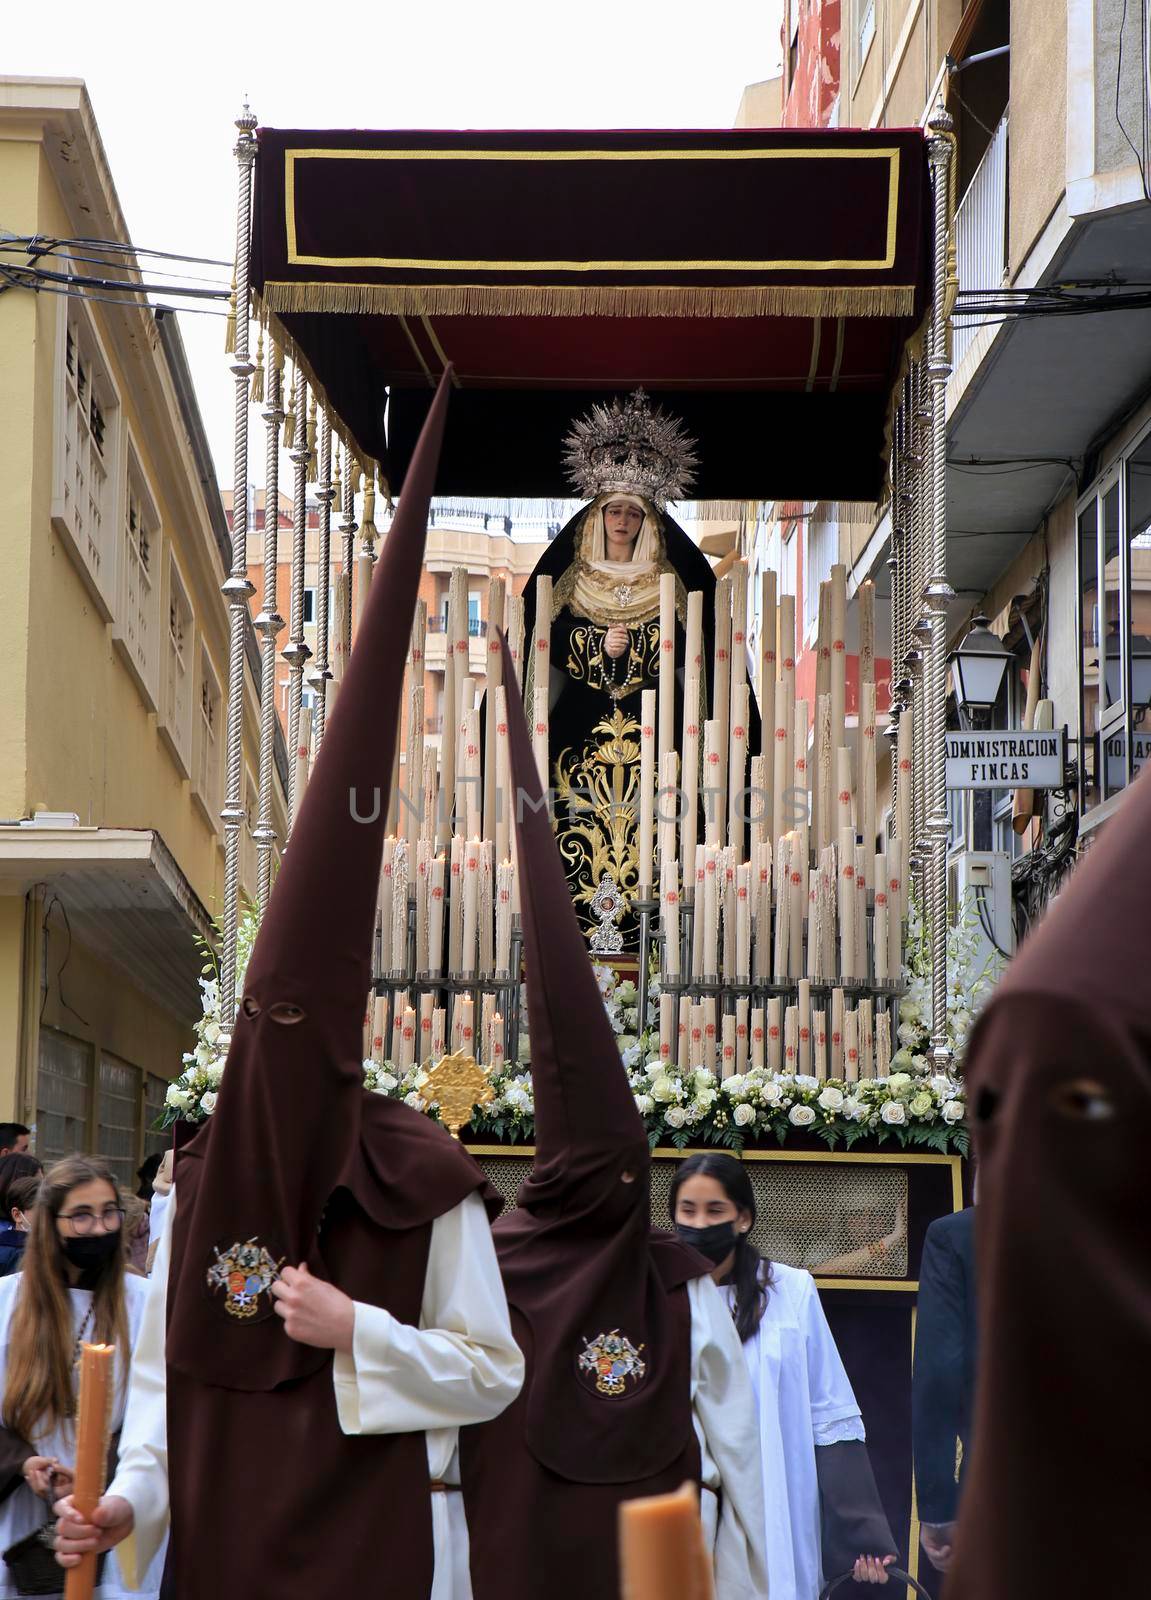 Easter Parade in procession of Holy Week in Elche, Spain by soniabonet